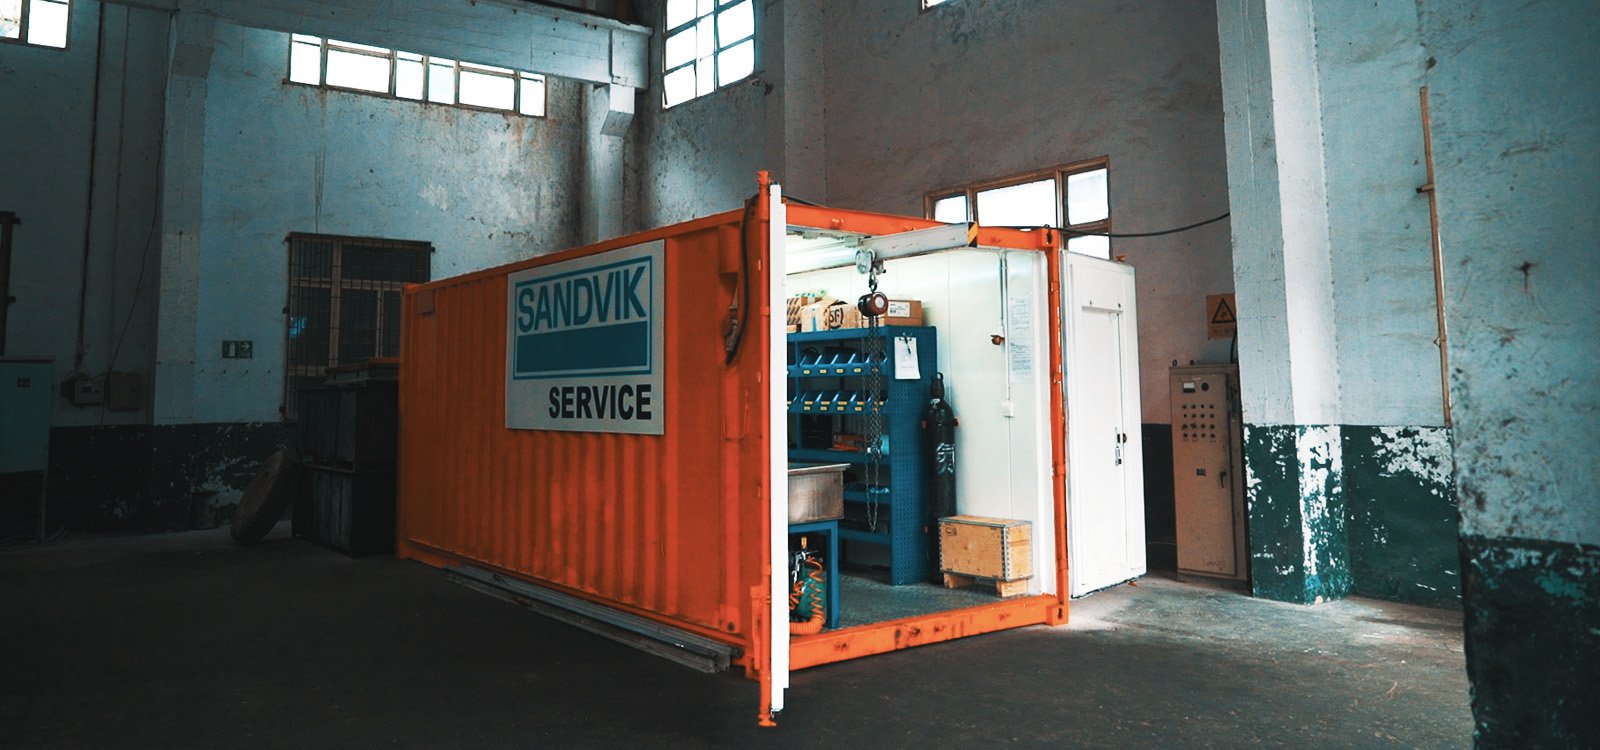 <p>The container, supplied by Sandvik, contains maintenance equipment and a workstation.</p>